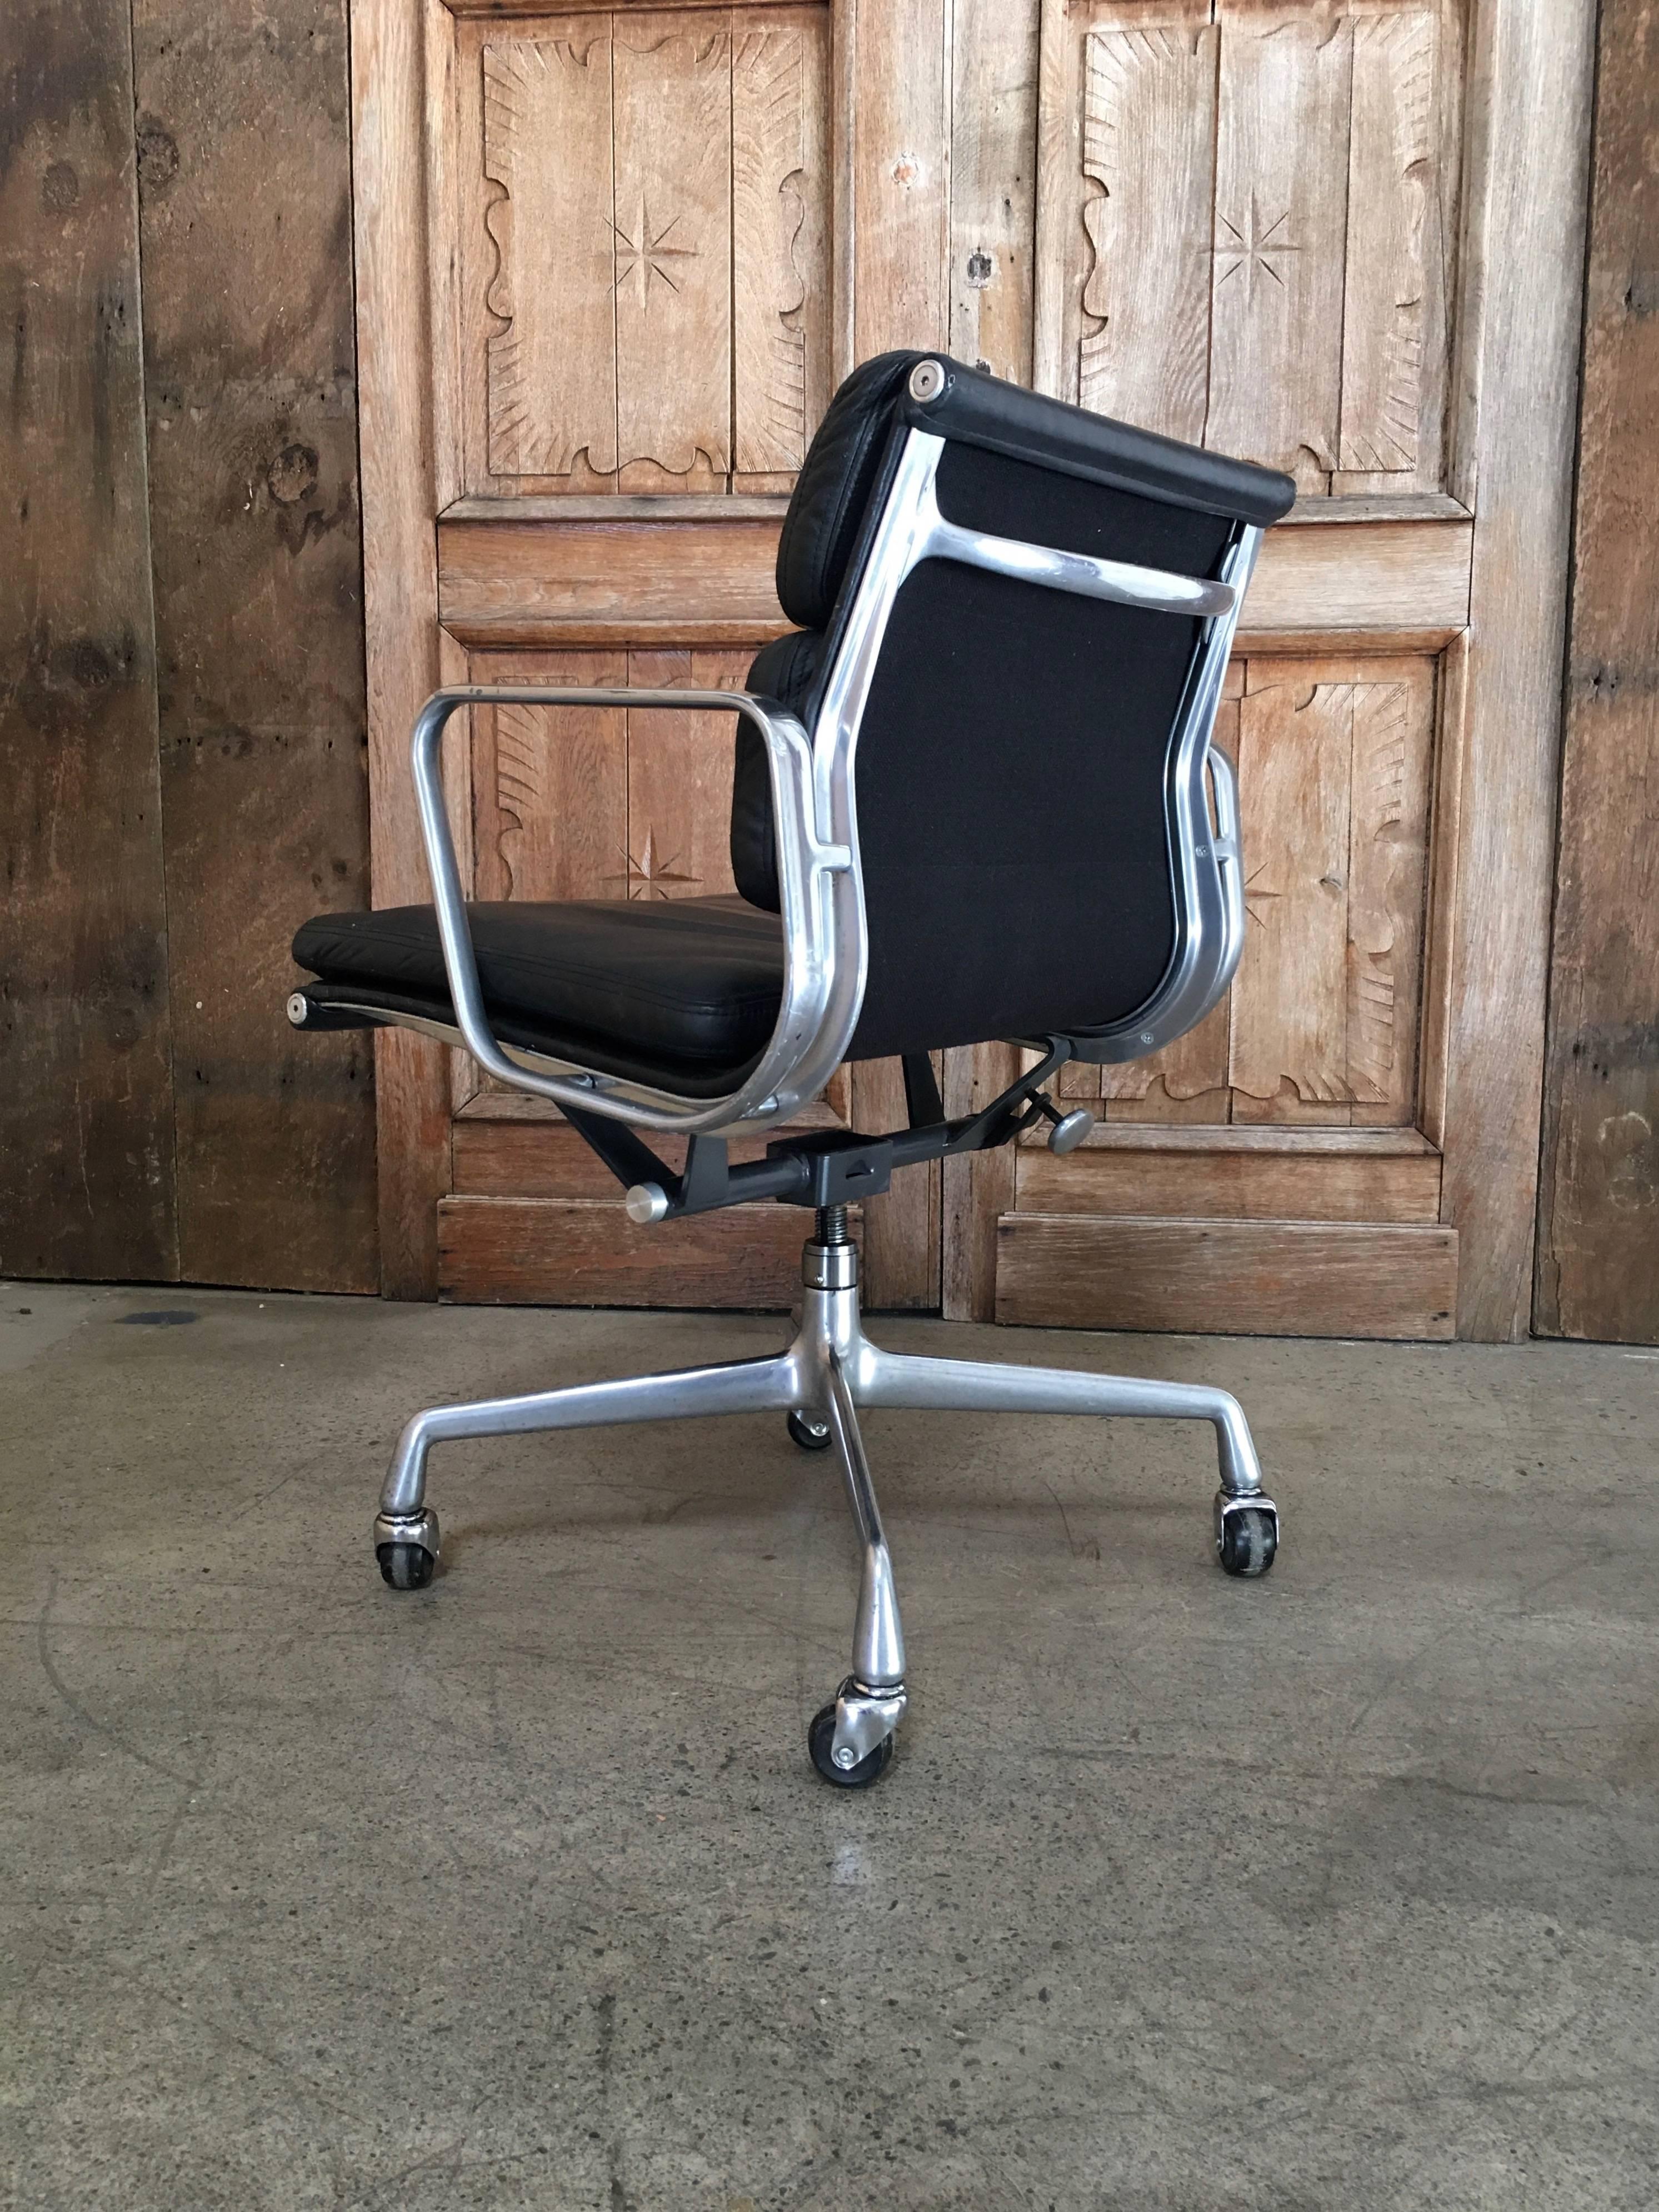 We have six of these soft pad aluminium group management desk chairs available designed by Charles and Ray Eames for Herman Miller. Featuring the original vintage black leather upholstery over four-star aluminium base and frame.